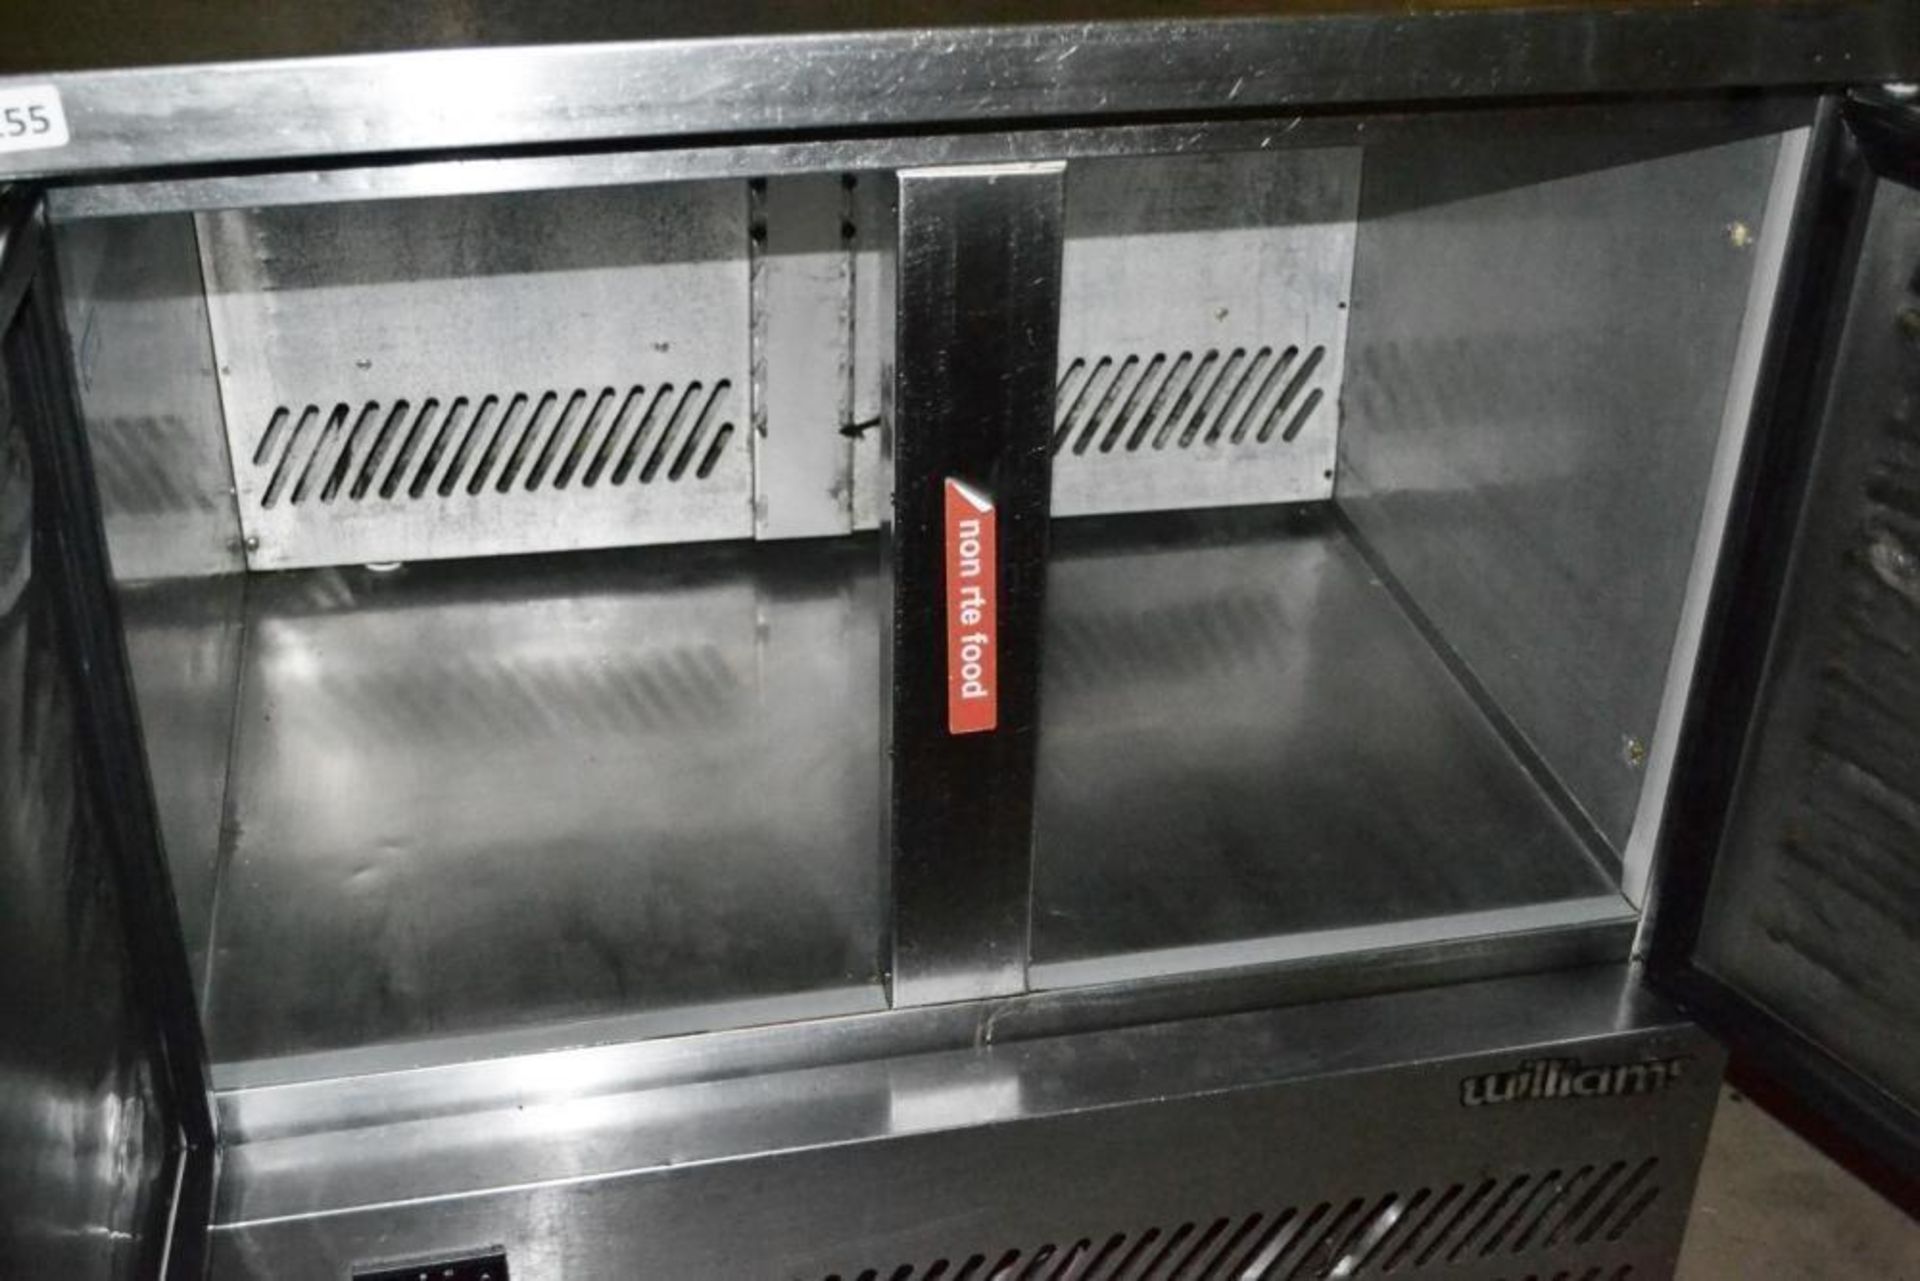 1 x Stainless Steel Commercial Two Door Hot Cupboard - Dimensions: 85 x W86 x D73cm - CL256 - Ref: L - Image 3 of 4